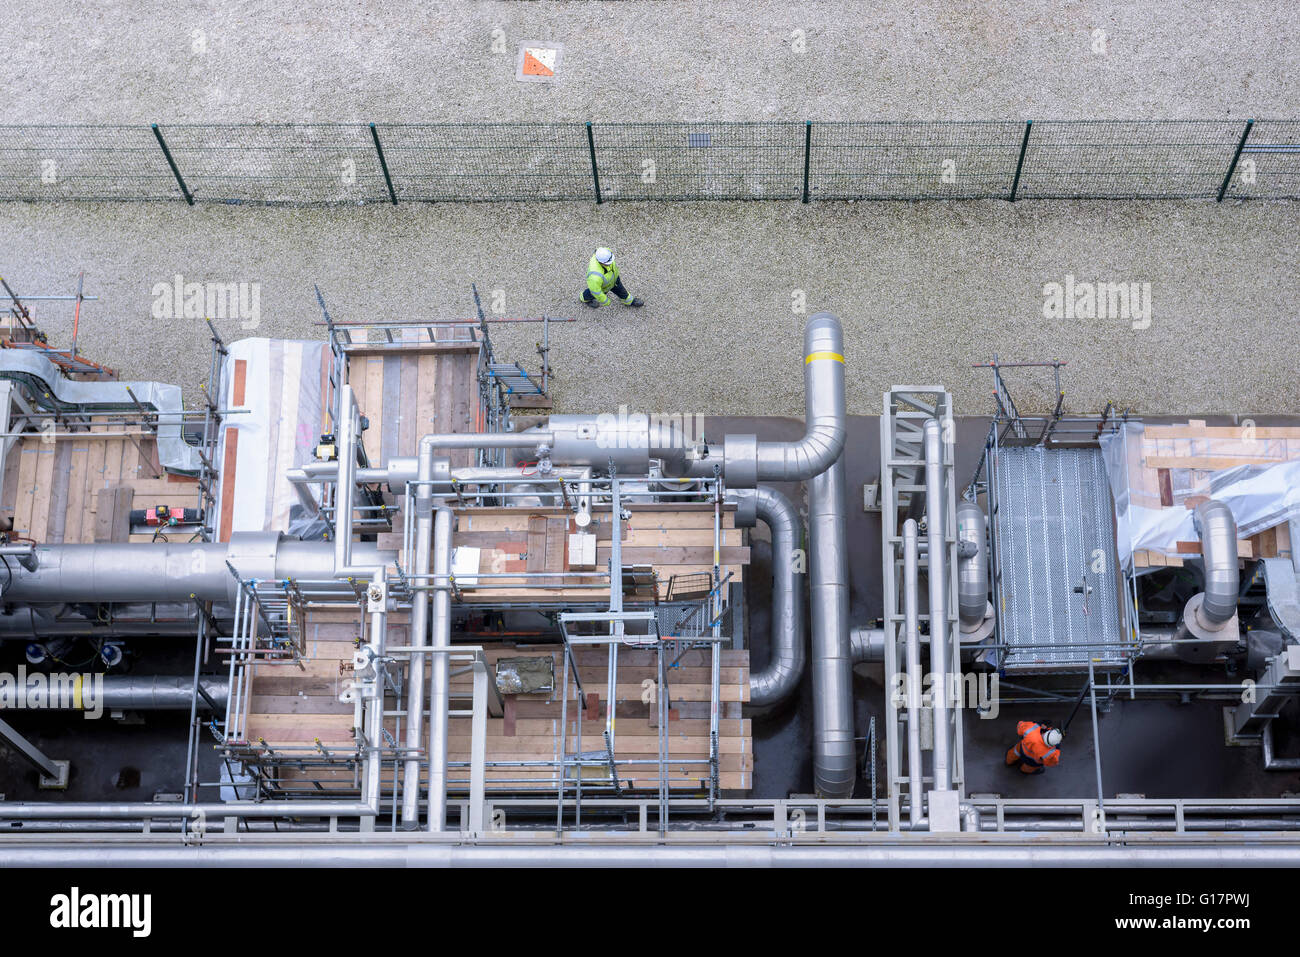 Overhead view of pipework under repair in gas-fired power station Stock Photo